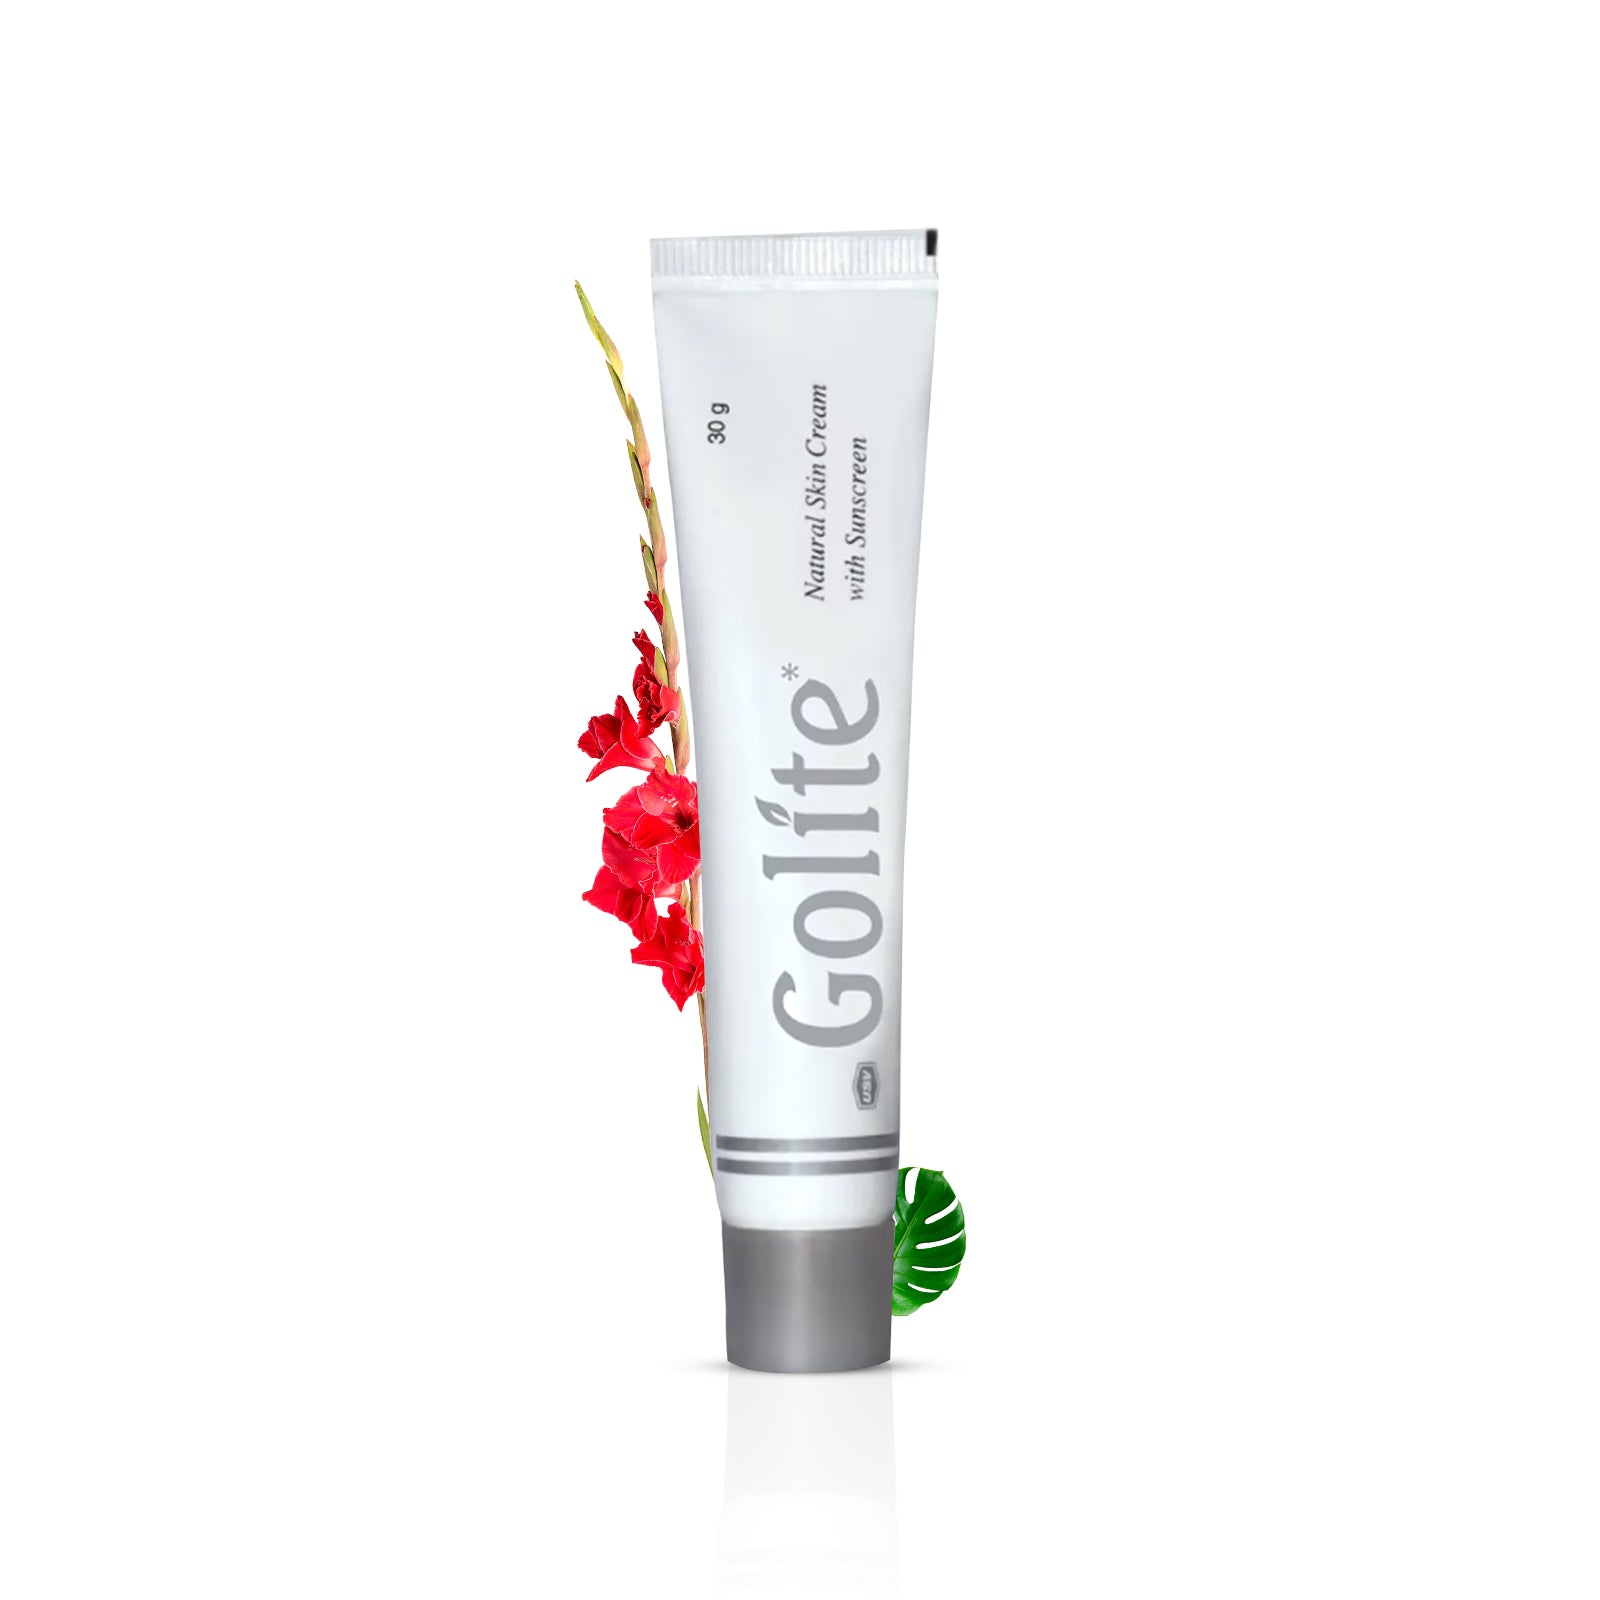 Golite Natural Skin cream with Sunscreen 30 gm